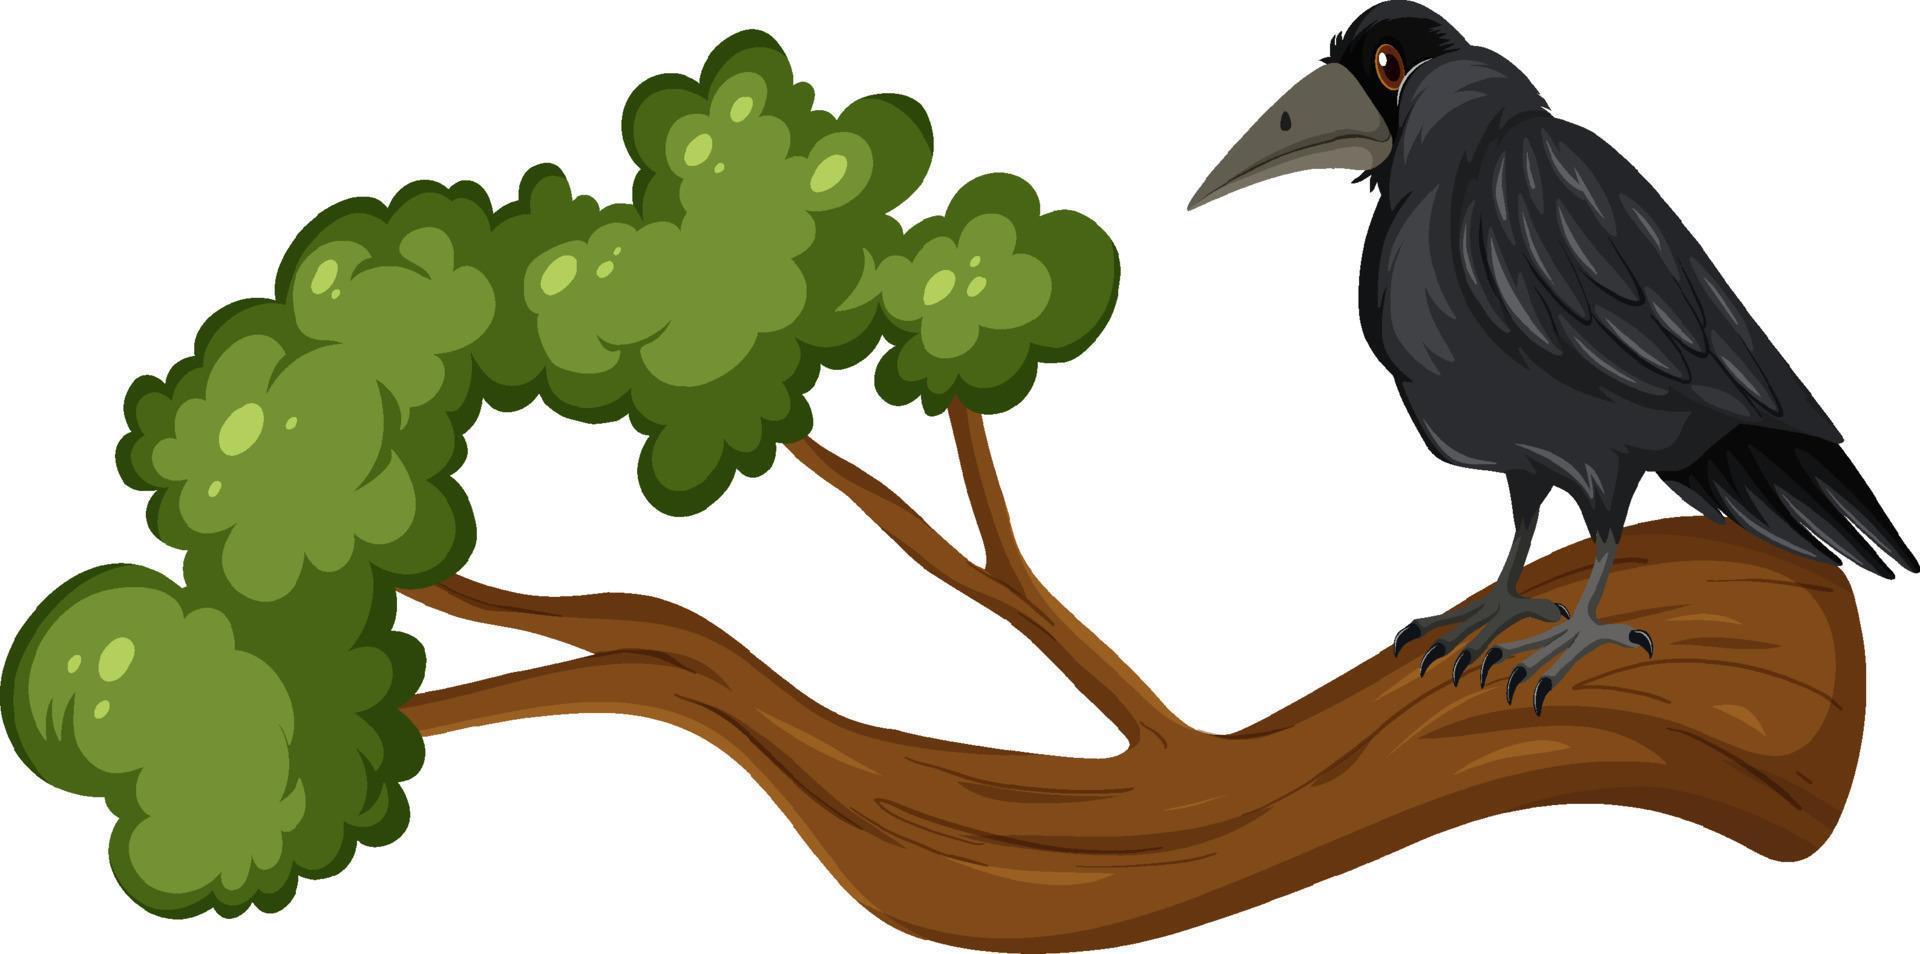 Crow standing on branch vector